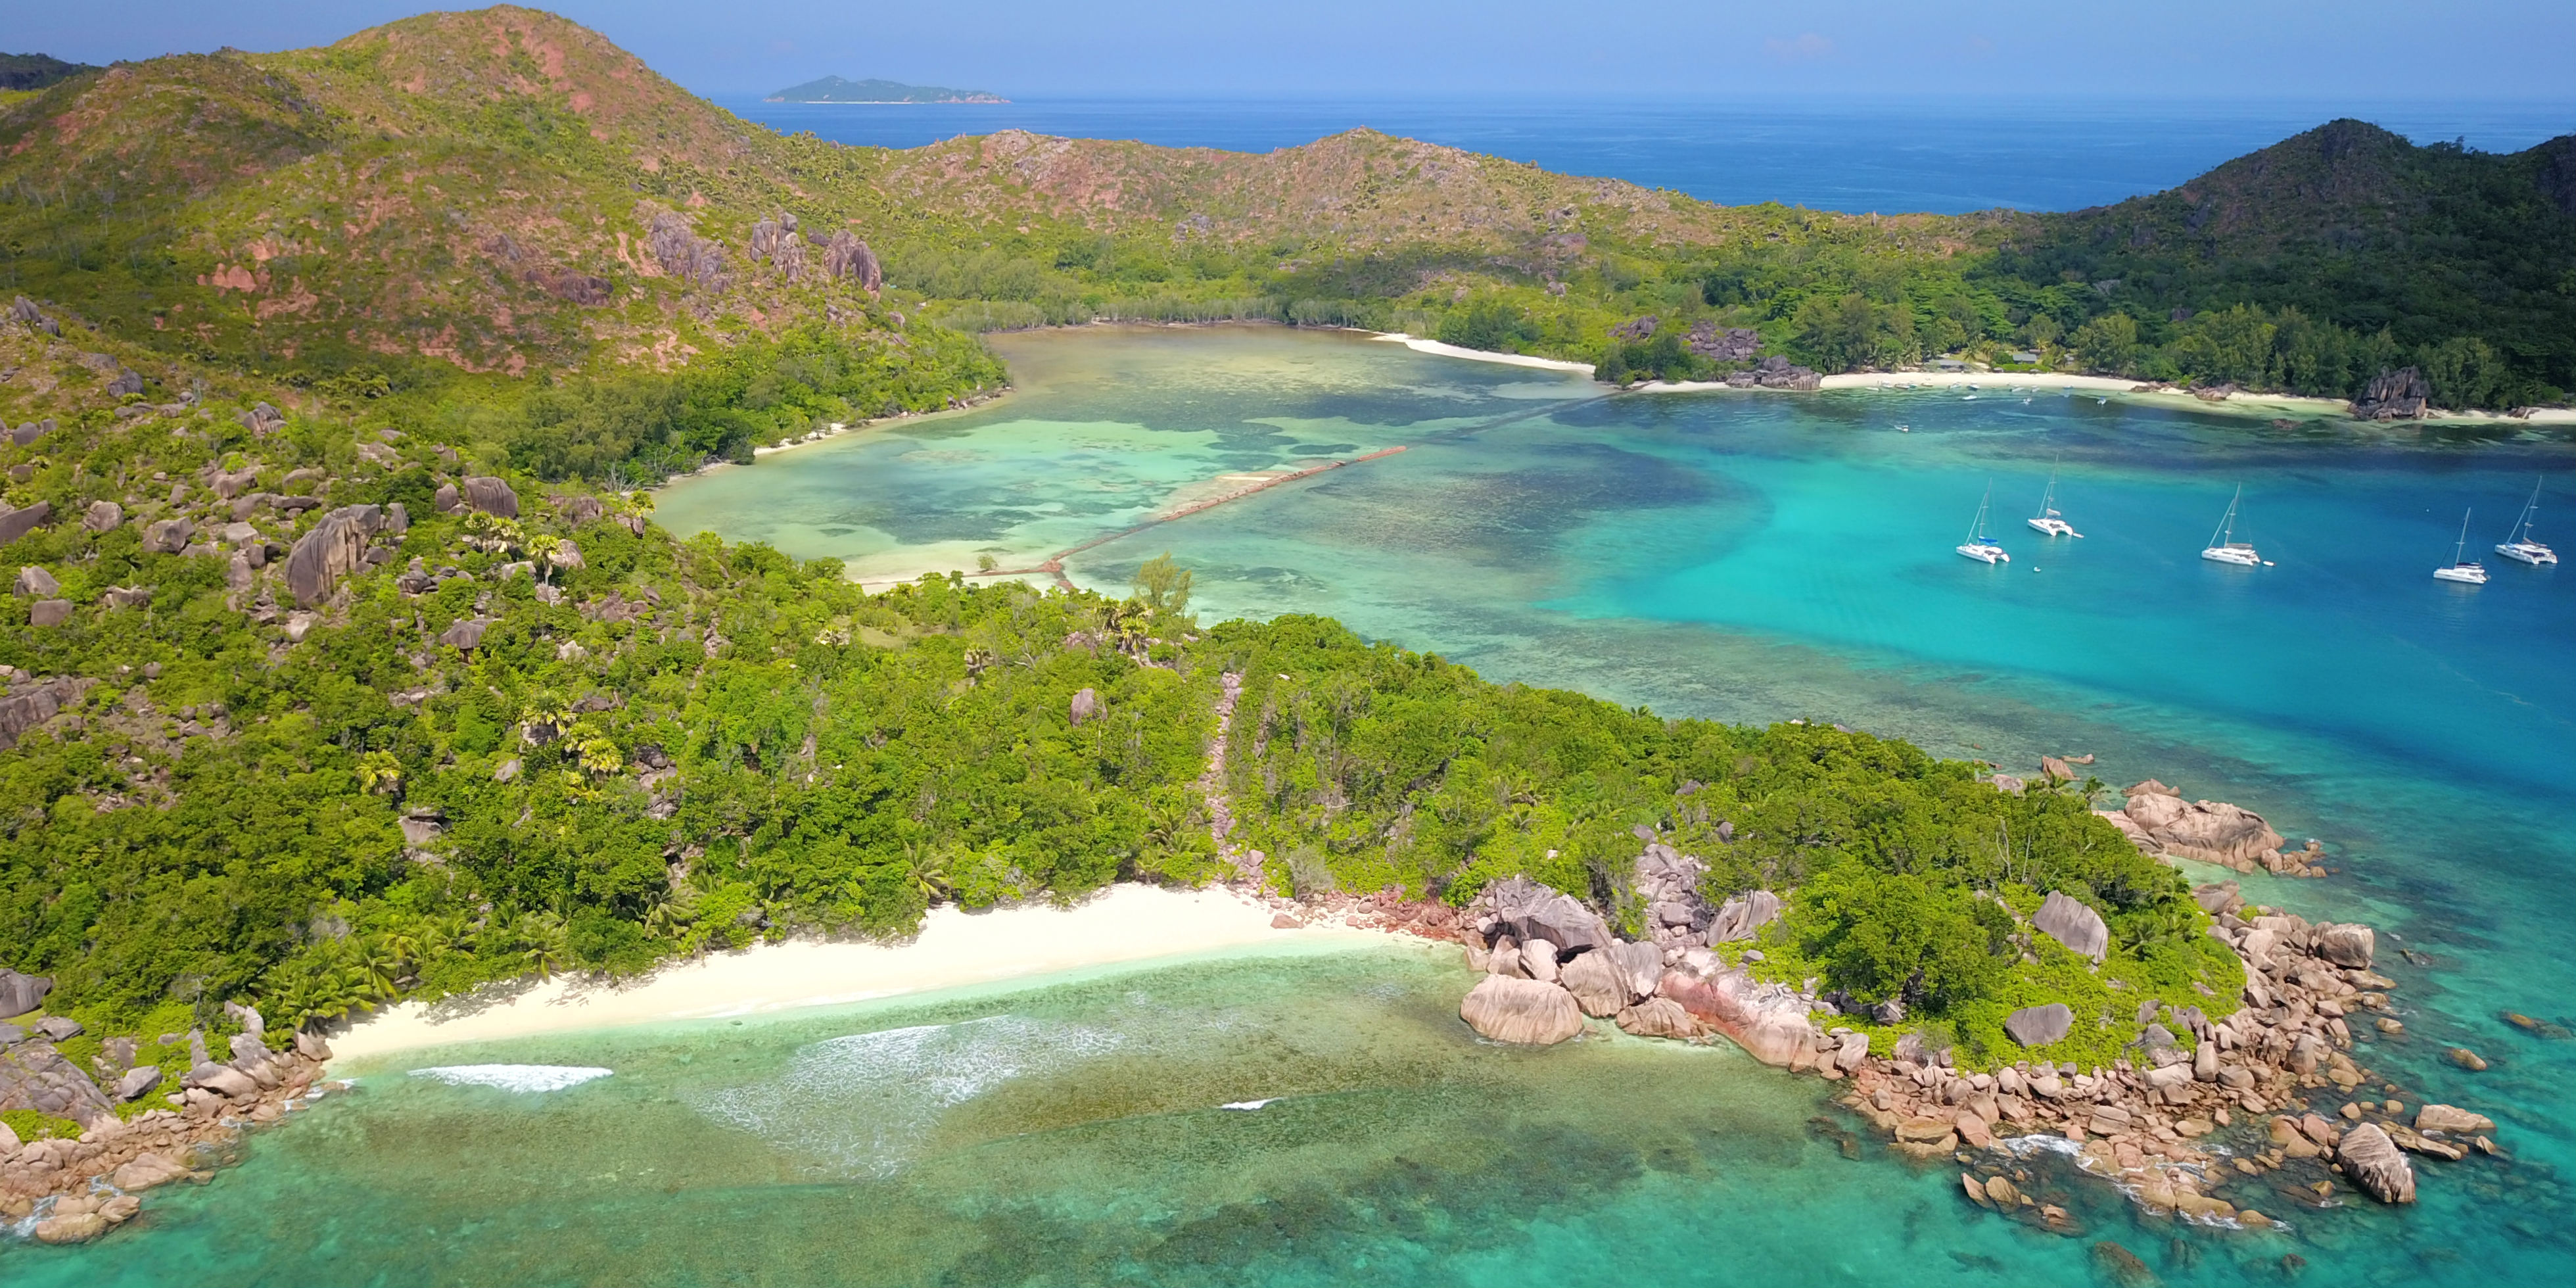 This remote GVI base runs wildlife conservation programs together with the Seychelles national park authority.